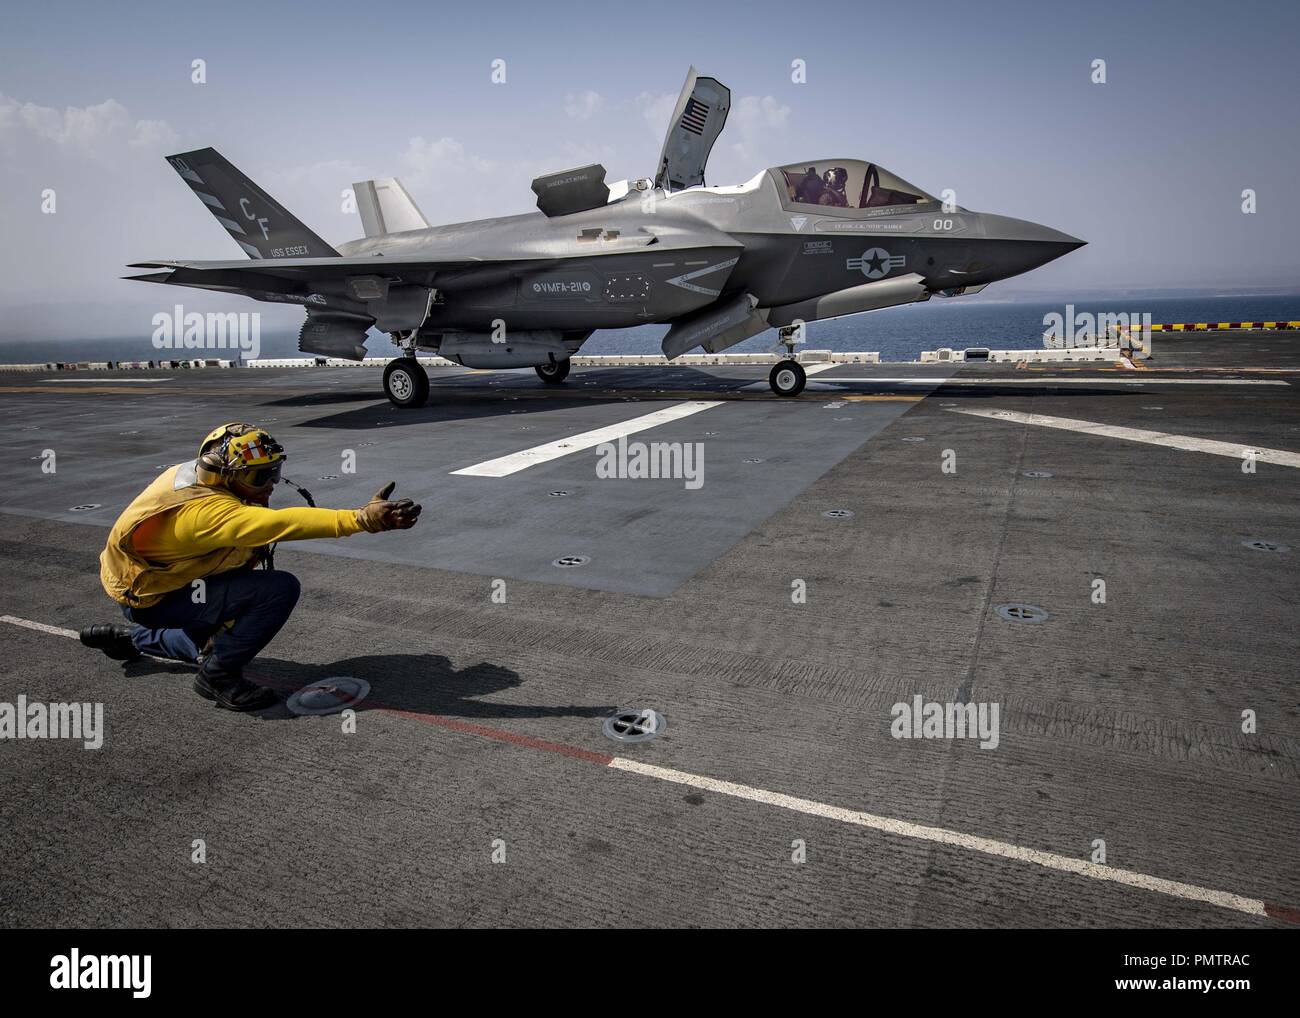 March 8, 2018 - GULF OF ADEN - GULF OF ADEN (Sept. 16, 2018) Aviation Boatswainâ€™s Mate 1st Class Landon Jamison launches an F-35B Lightning II attached to the Avengers of Marine Fighter Attack Squadron (VMFA) 211 from the flight deck of the Wasp-class amphibious assault ship USS Essex (LHD 2) during a scheduled deployment of the Essex Amphibious Ready Group (ARG) and 13th Marine Expeditionary Unit (MEU). The Essex ARG/13th MEU is the first U.S. Navy/Marine Corps team to deploy tot eh U.S. 5th Fleet area of operations with the transformational warfighting capabilities of the F-35B Lightning I Stock Photo